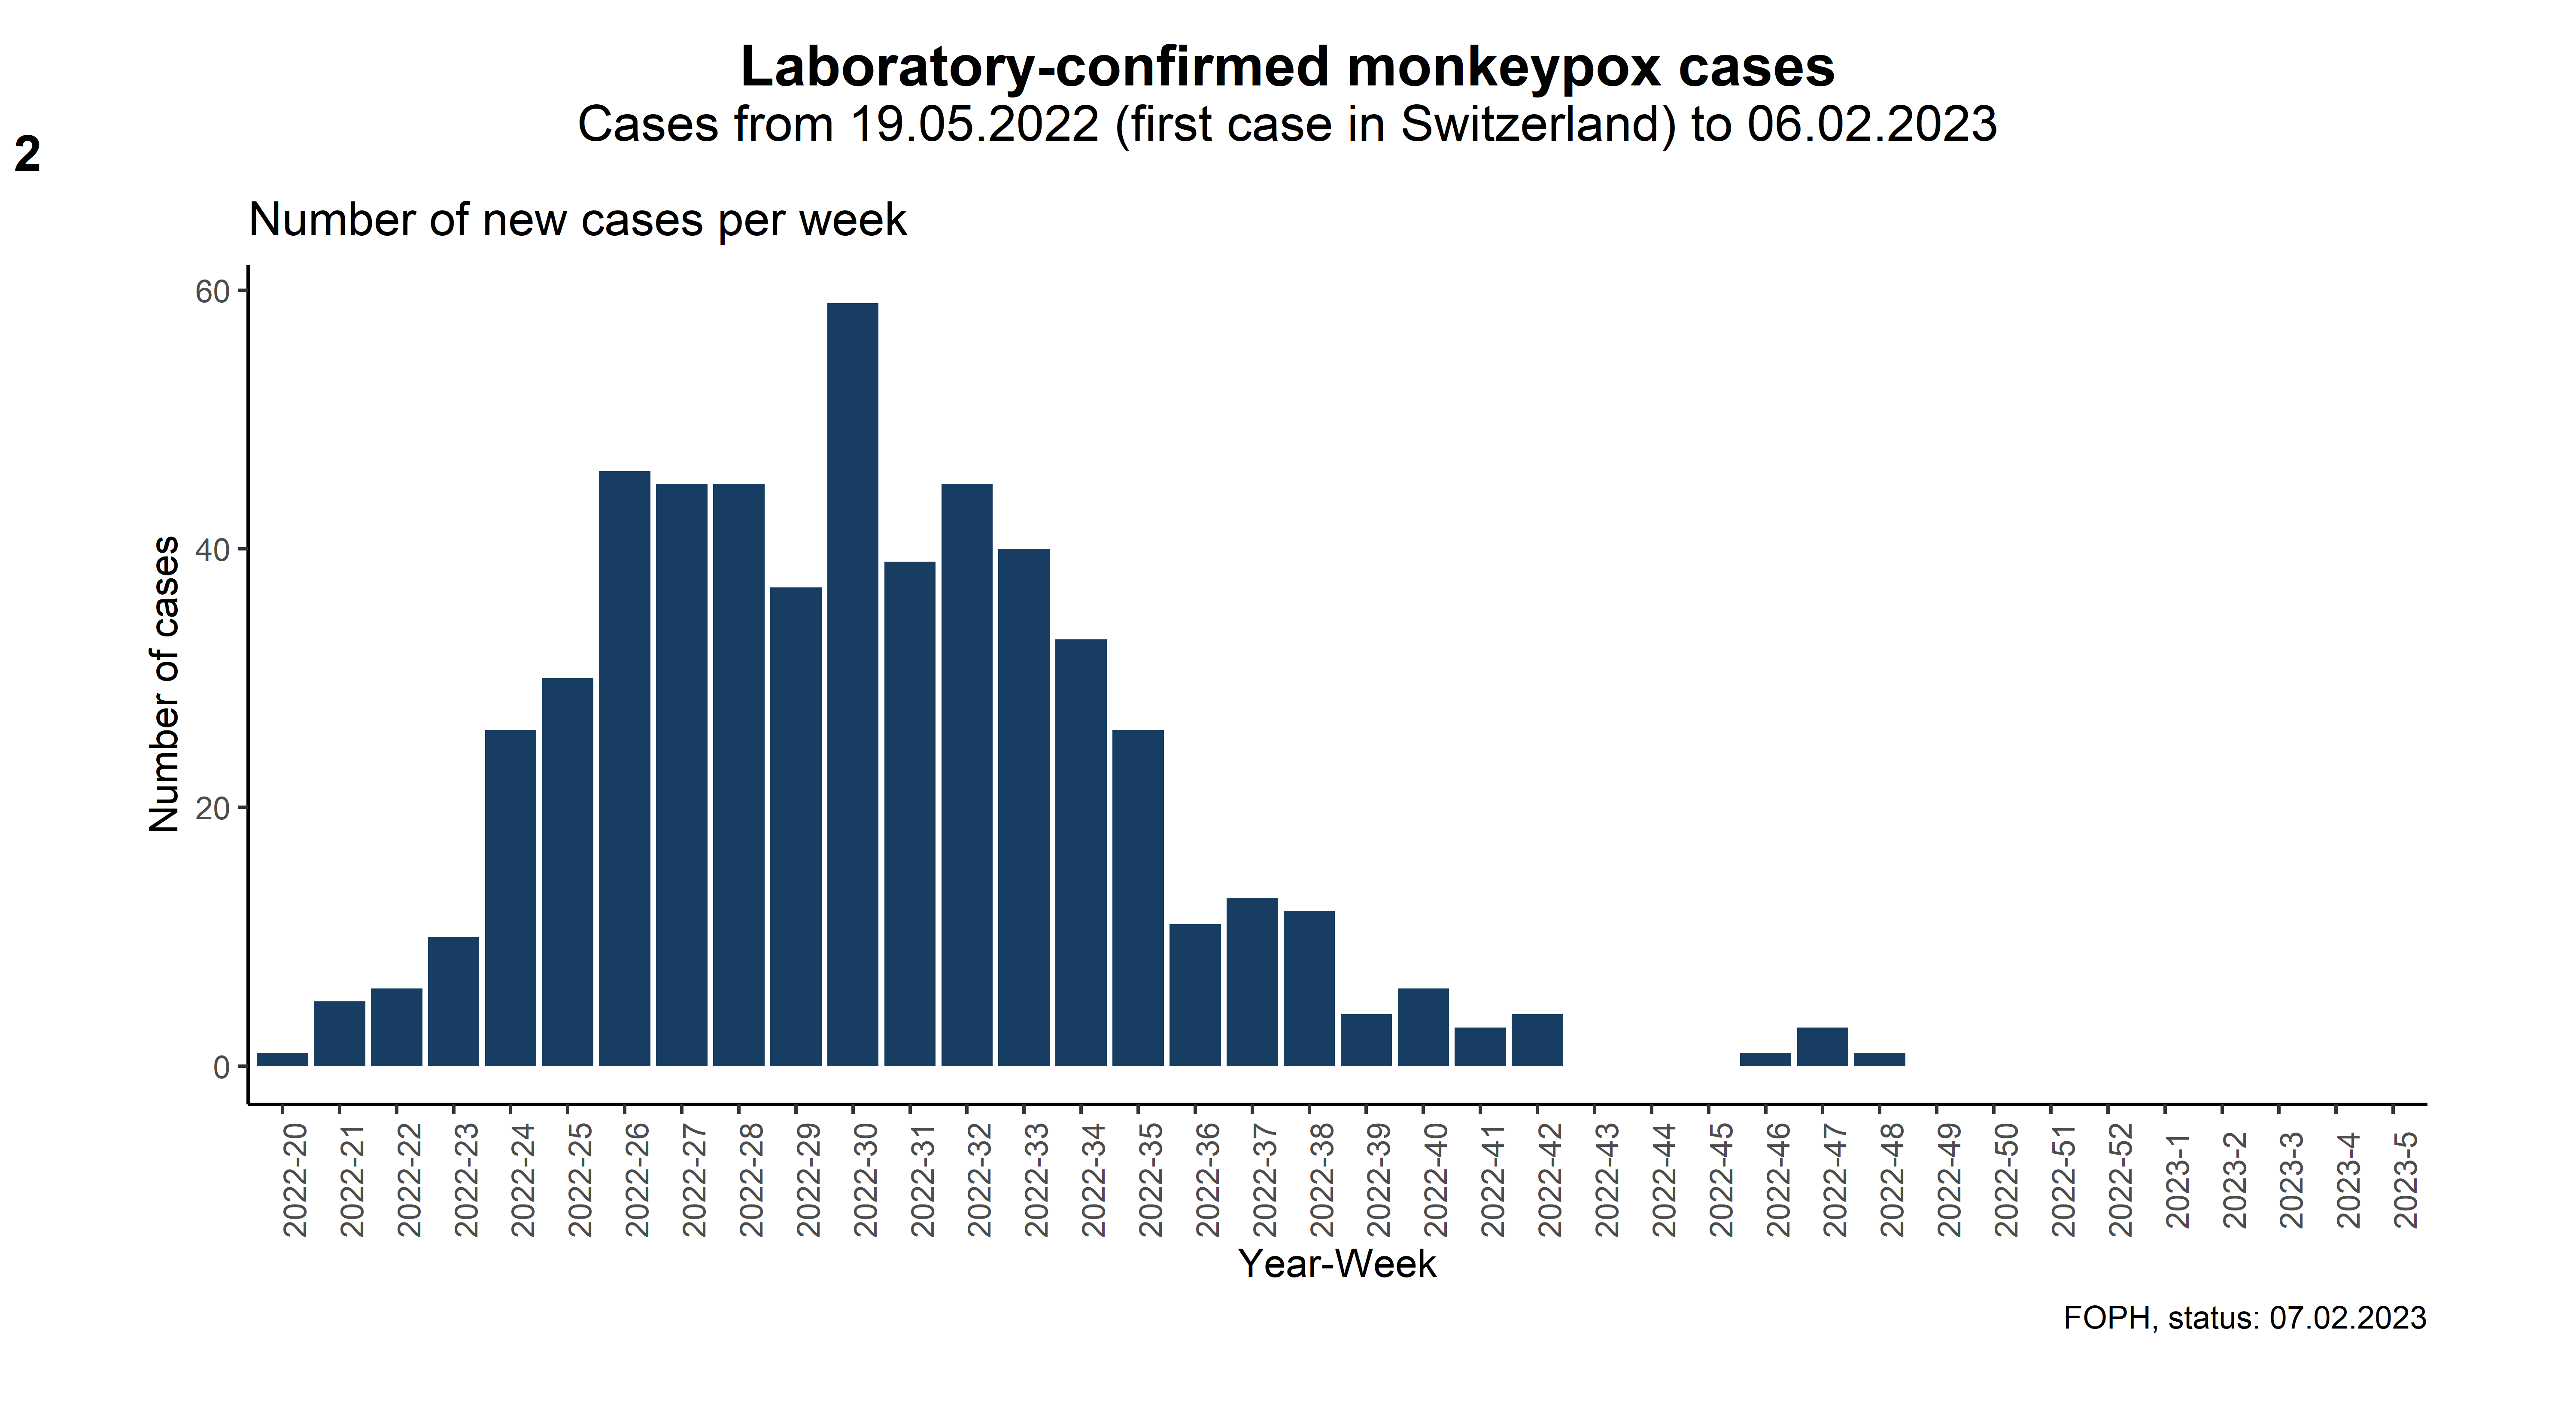 Figure 2: Epidemic curve showing number of laboratory-confirmed monkeypox cases per week (related data in the Excel table)